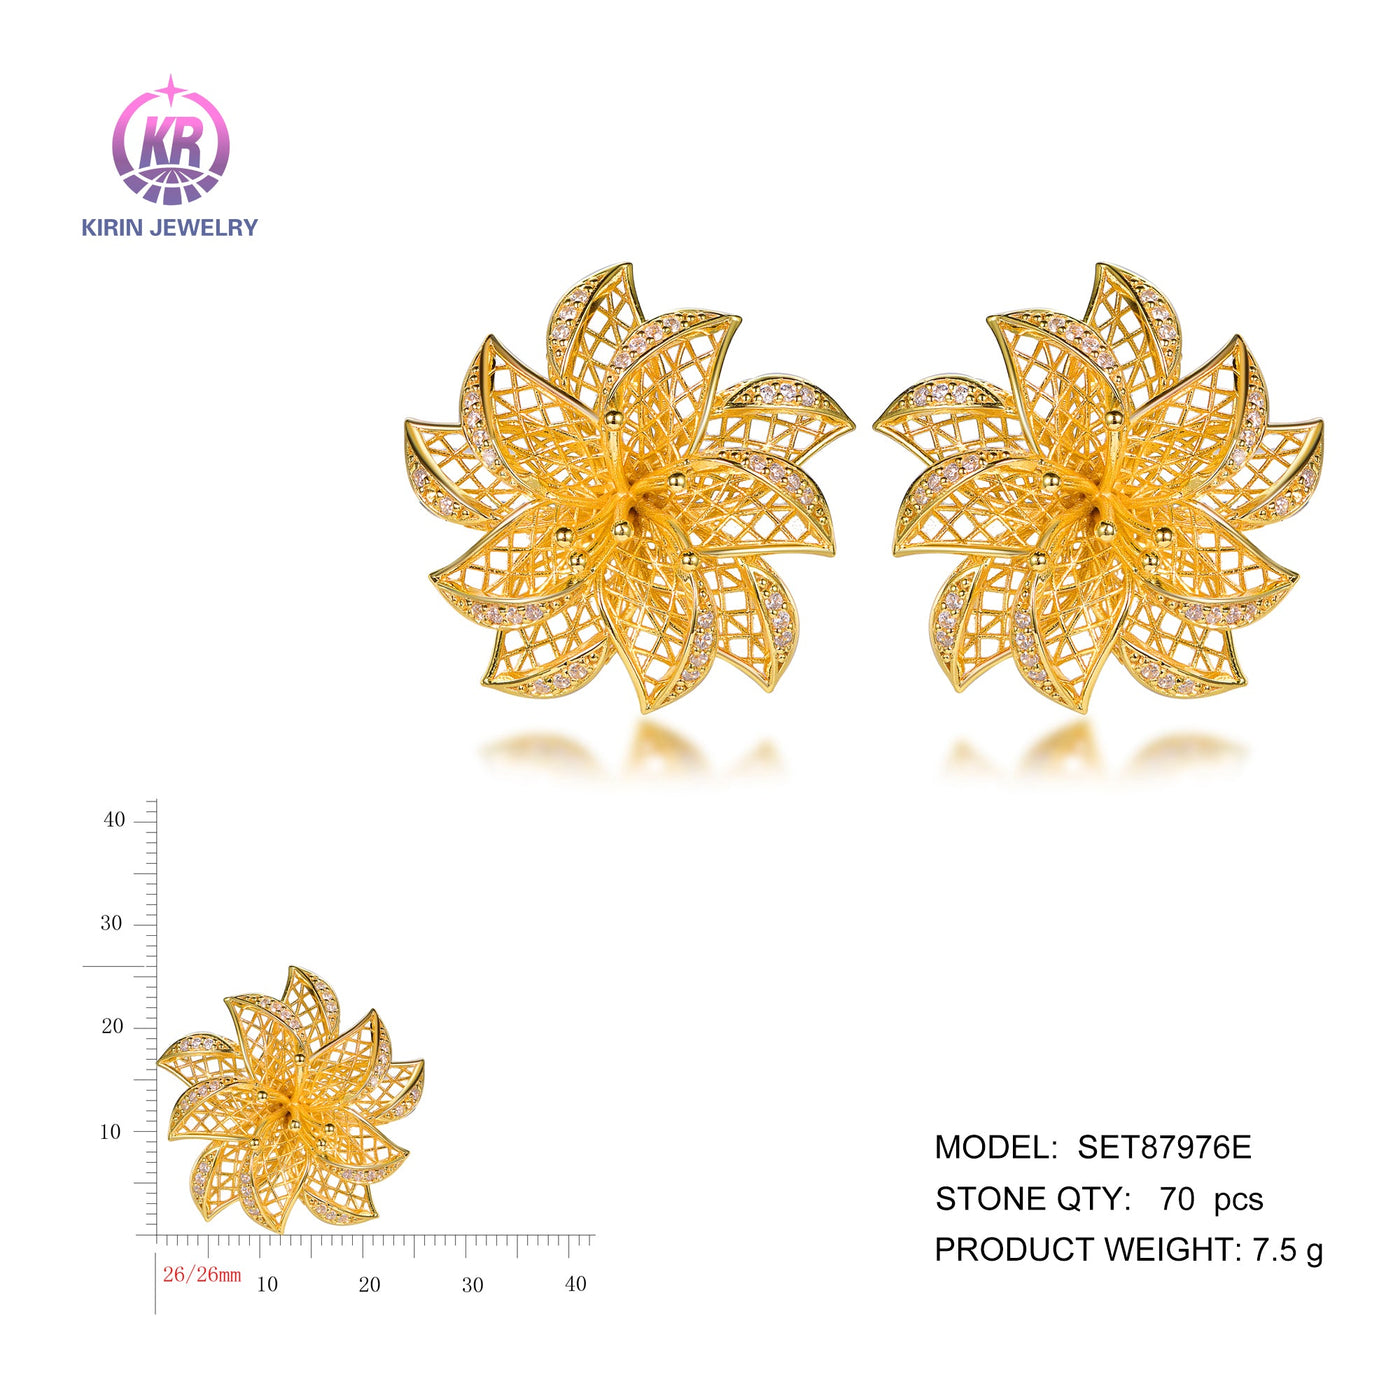 925 silver earrings with 2-tone plating rhodium and 14K gold SET87976E Kirin Jewelry